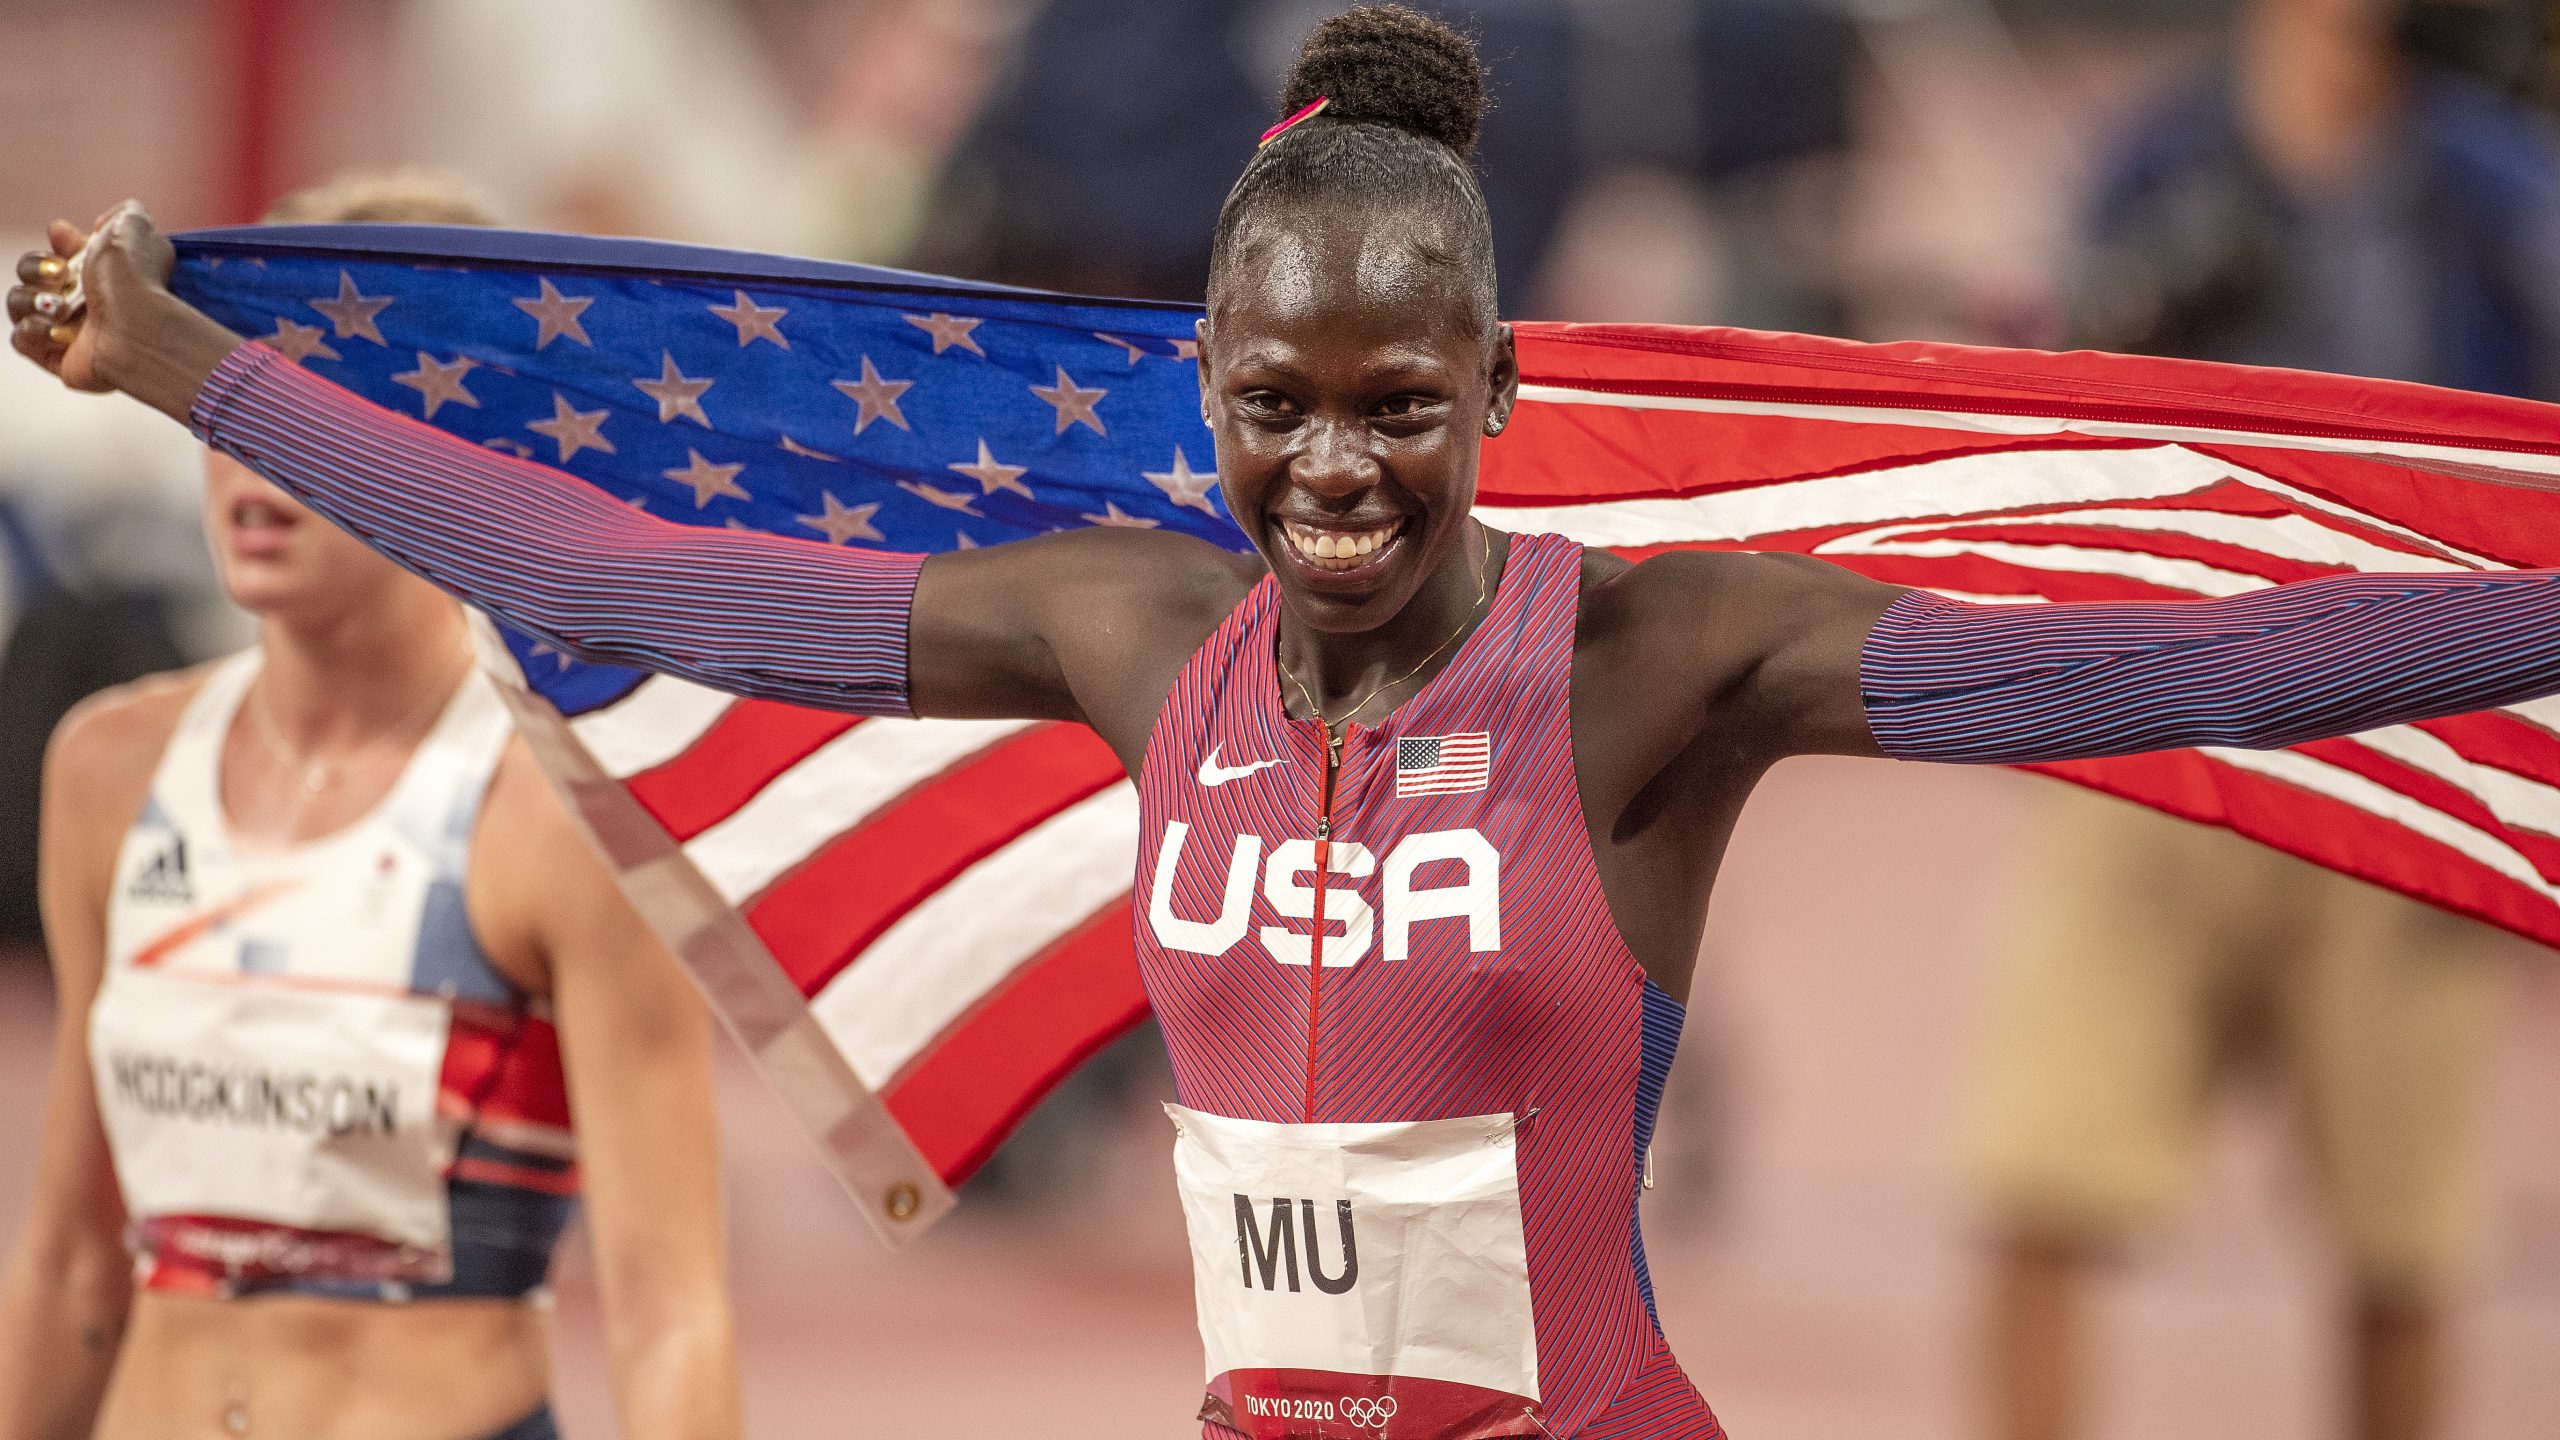 19-Year-Old Athing Mu Is The First American Woman To Win Olympic Gold In The 800m Since 1968